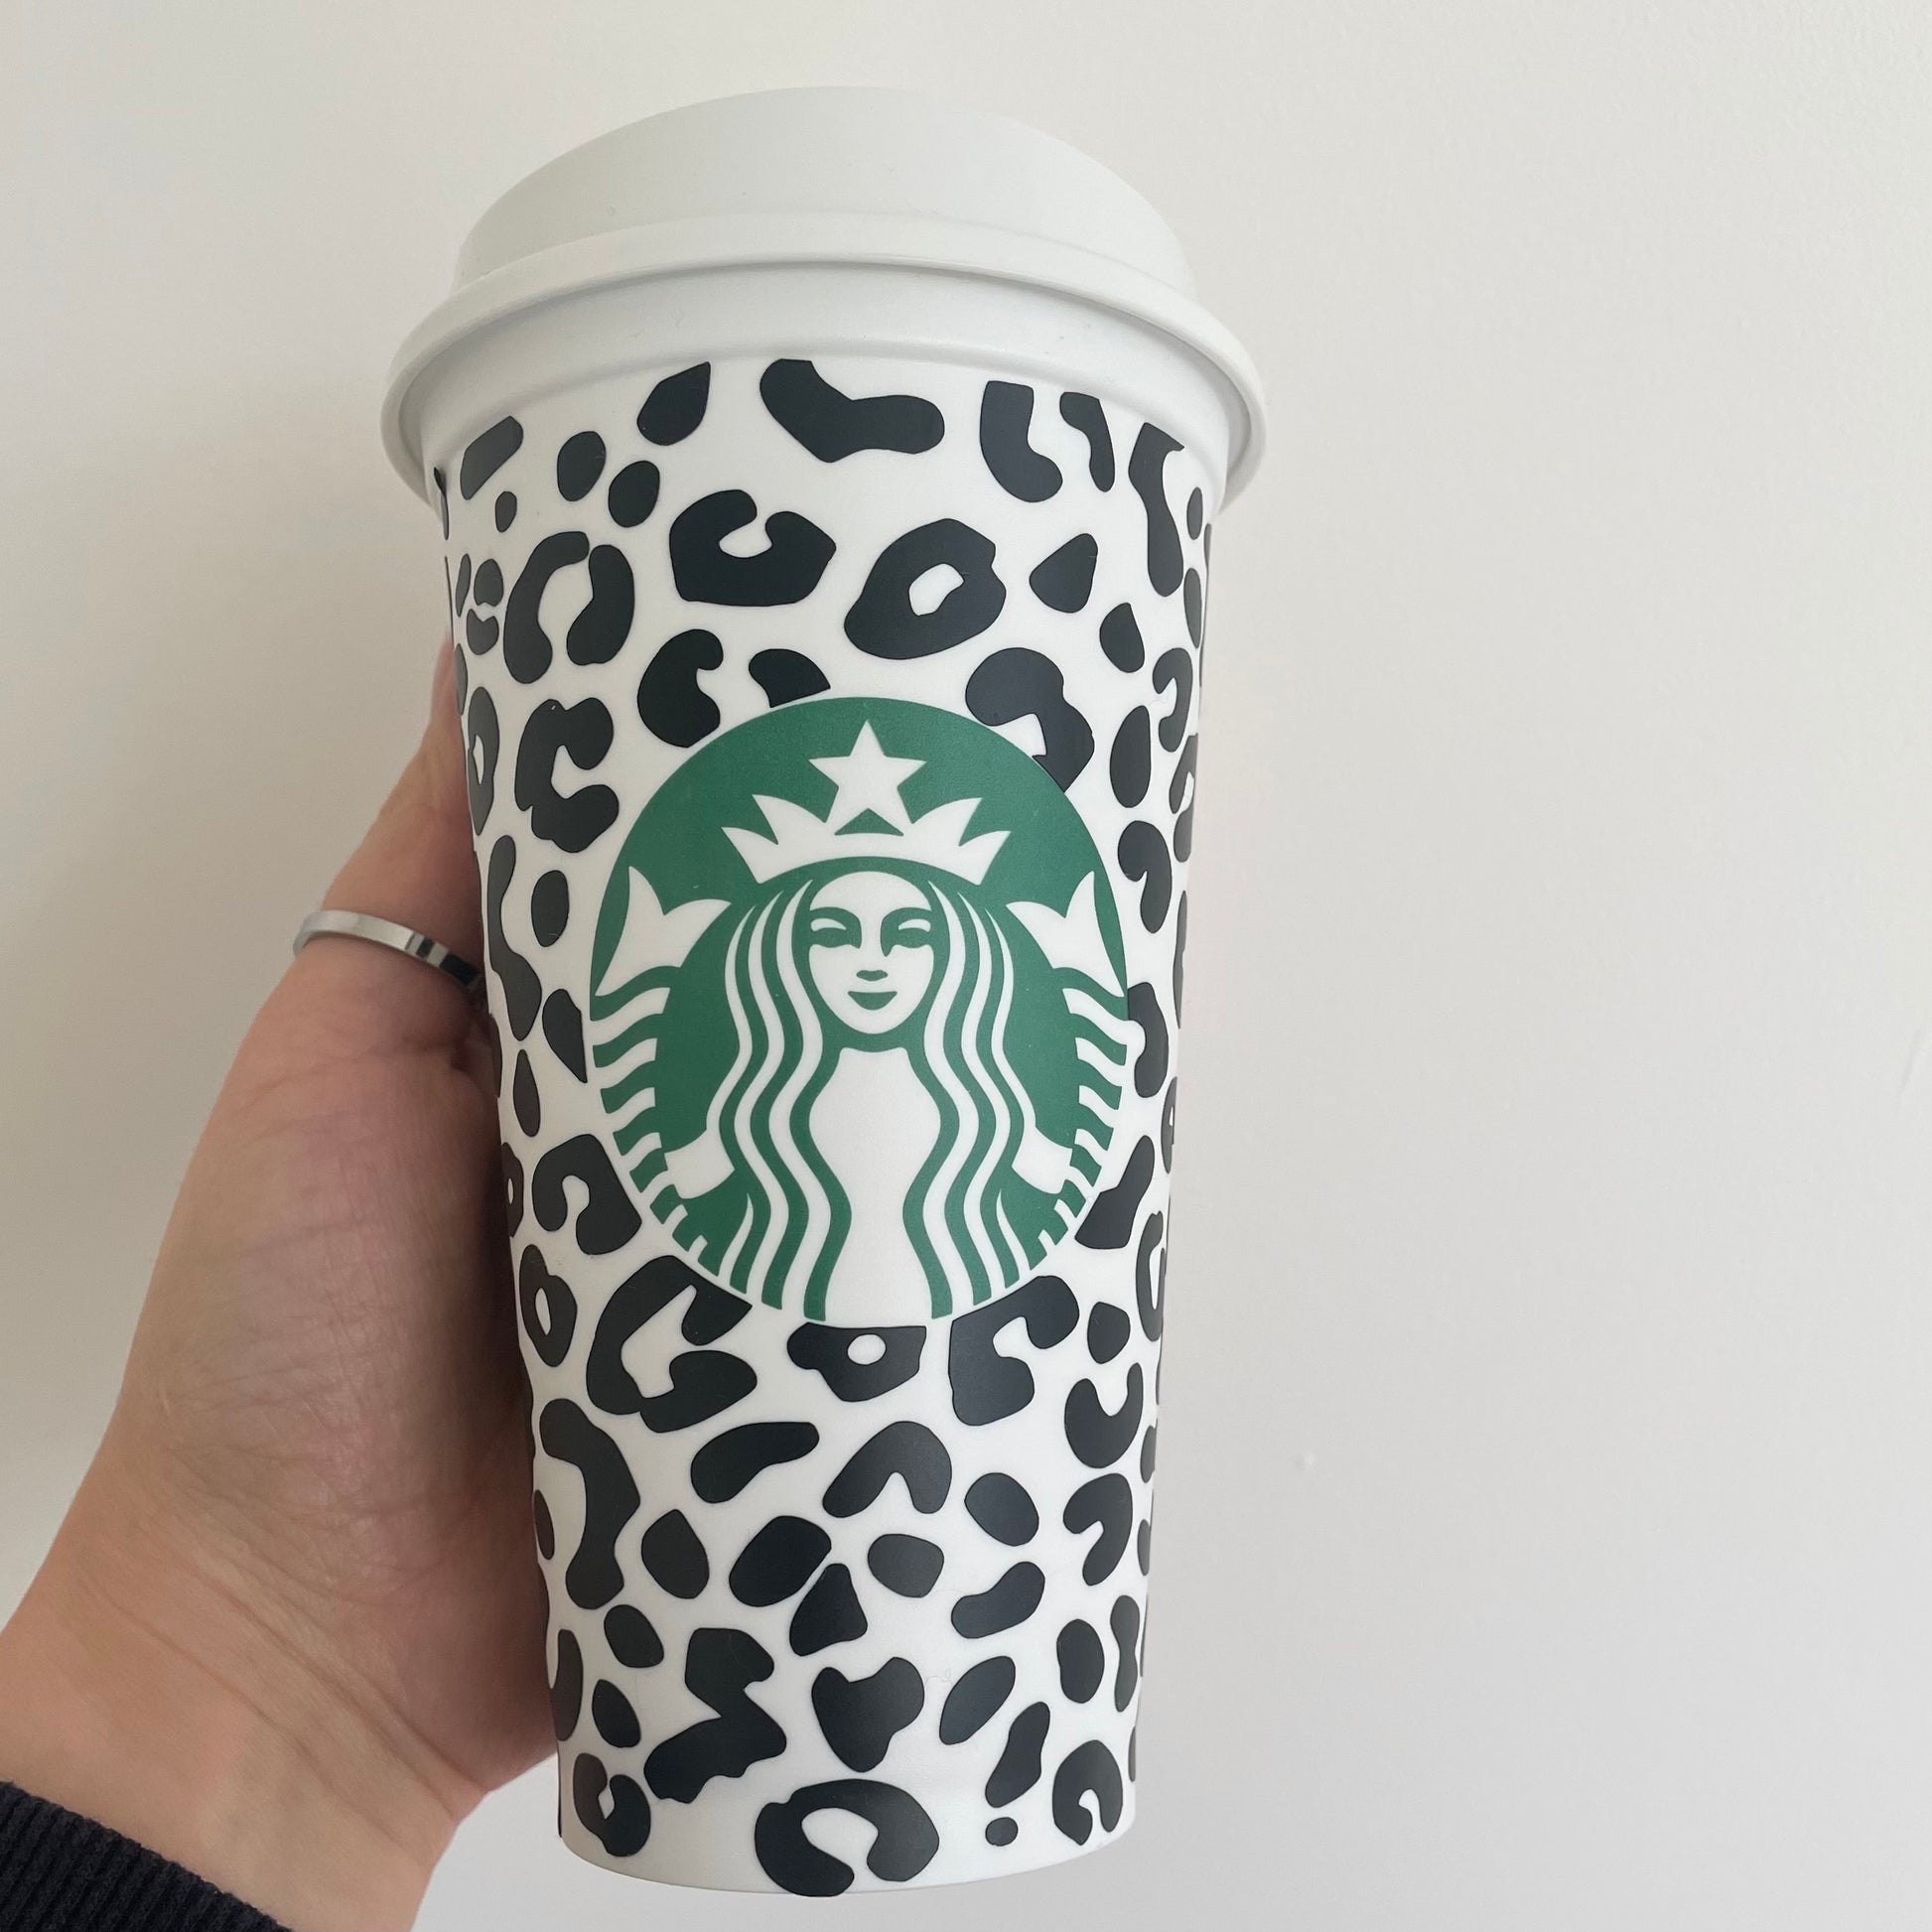 16oz Reusable Starbucks hot cup with hearts